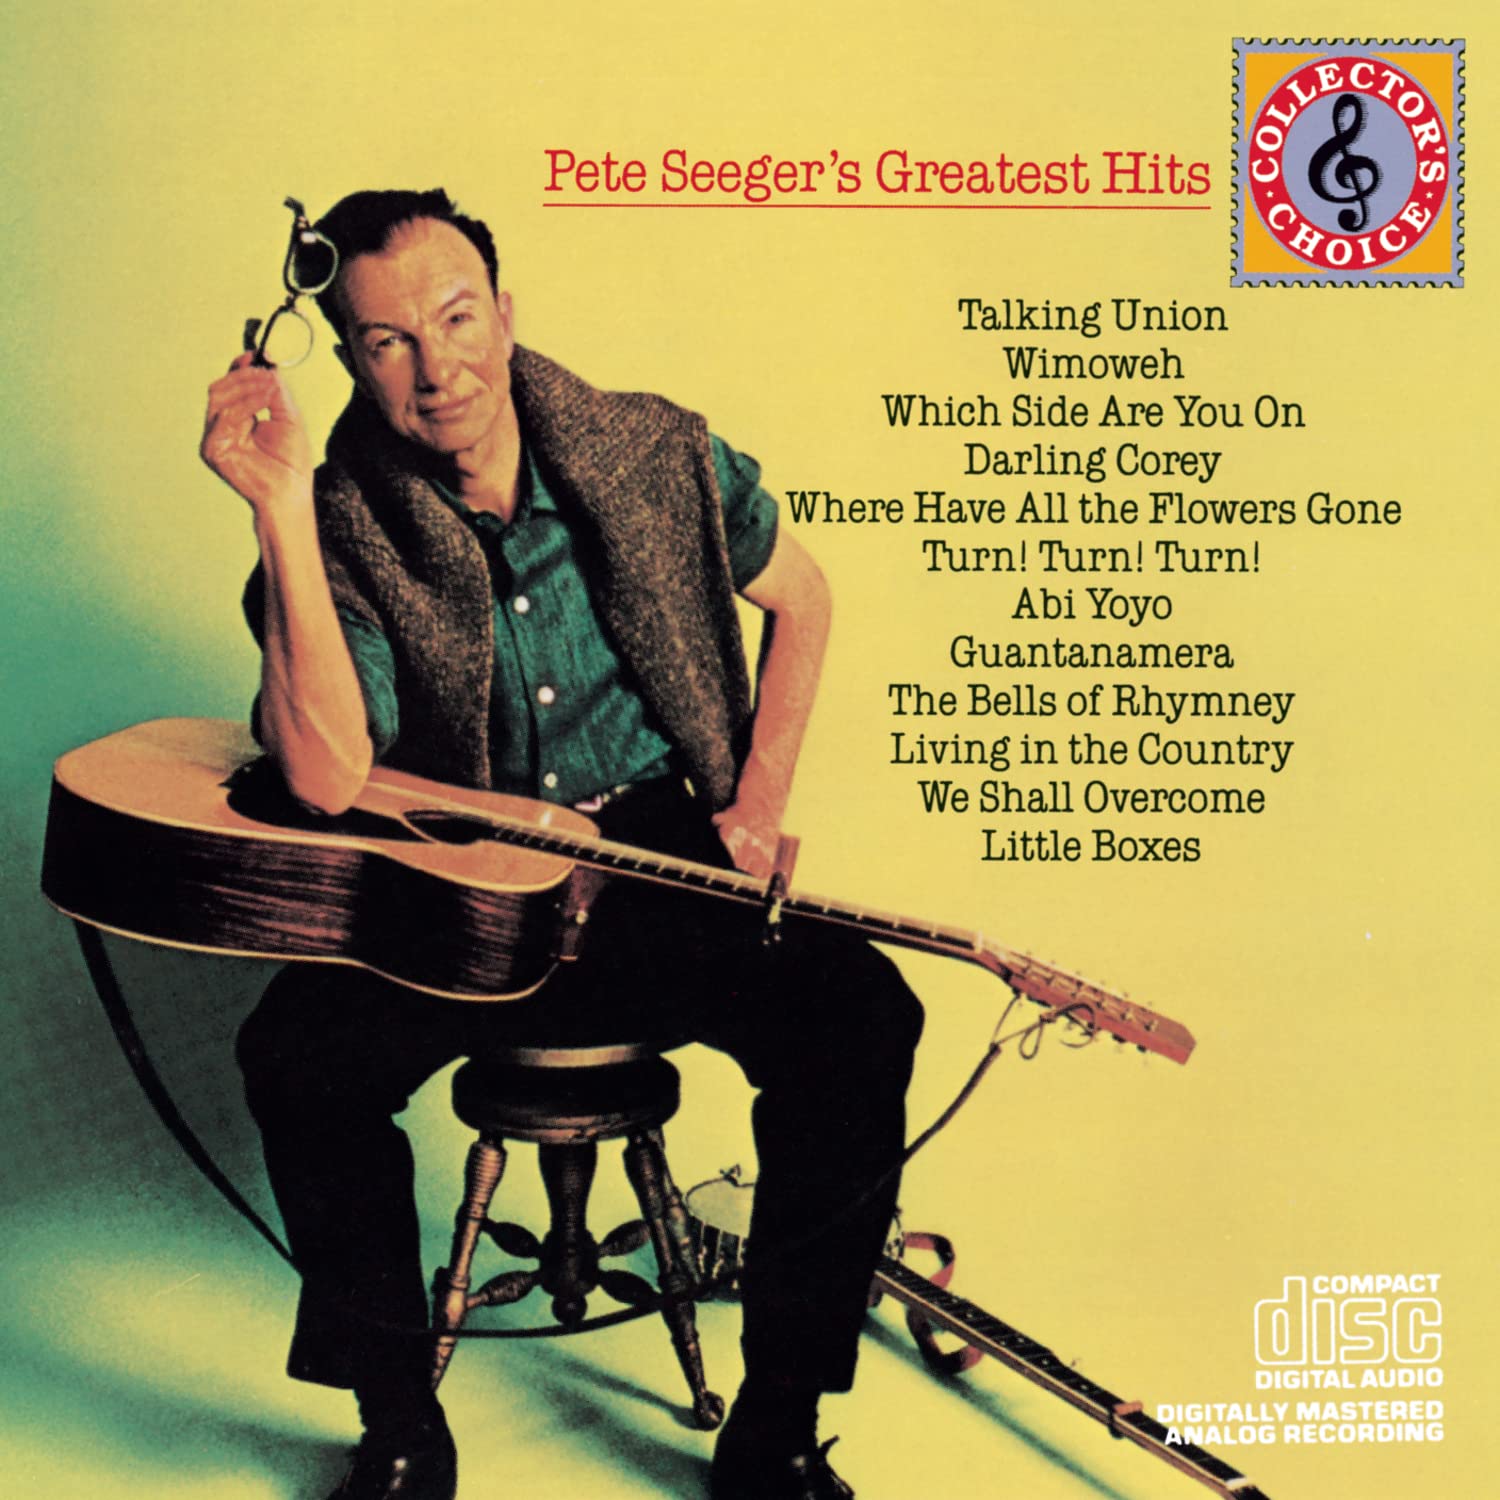 Pete Seeger- Greatest Hits